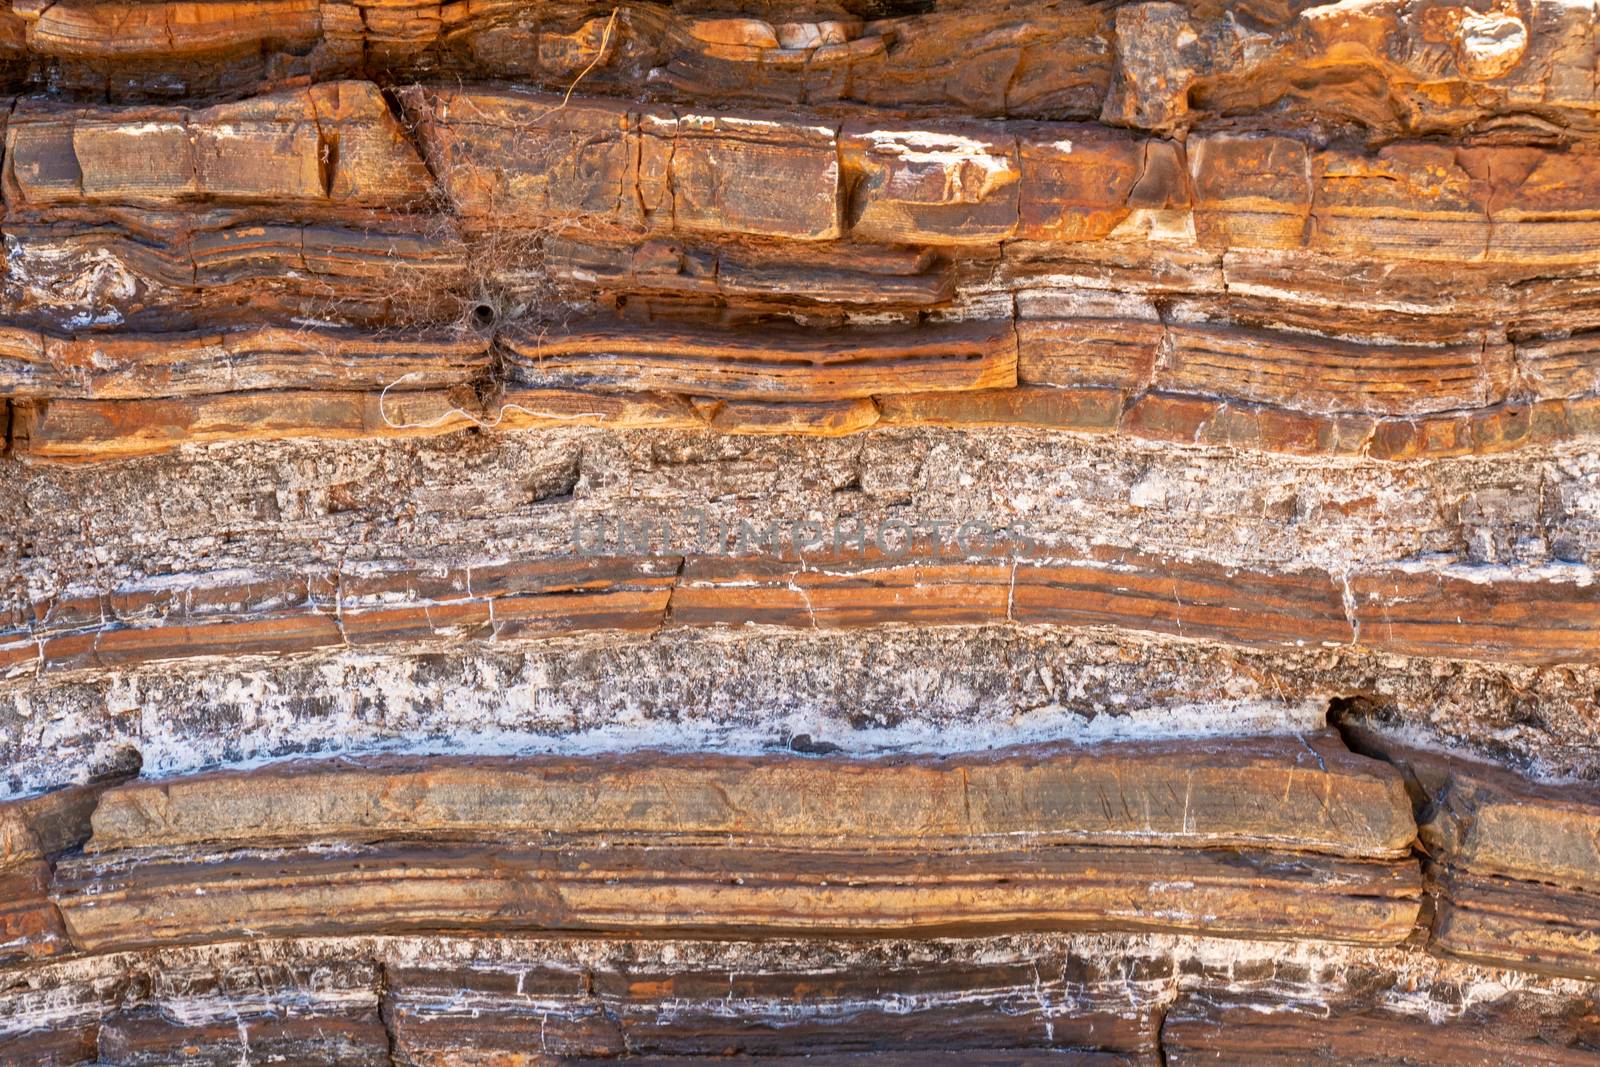 Sediment and rock layers at Karijini National Park in Dales Gorge including natural asbestos by MXW_Stock